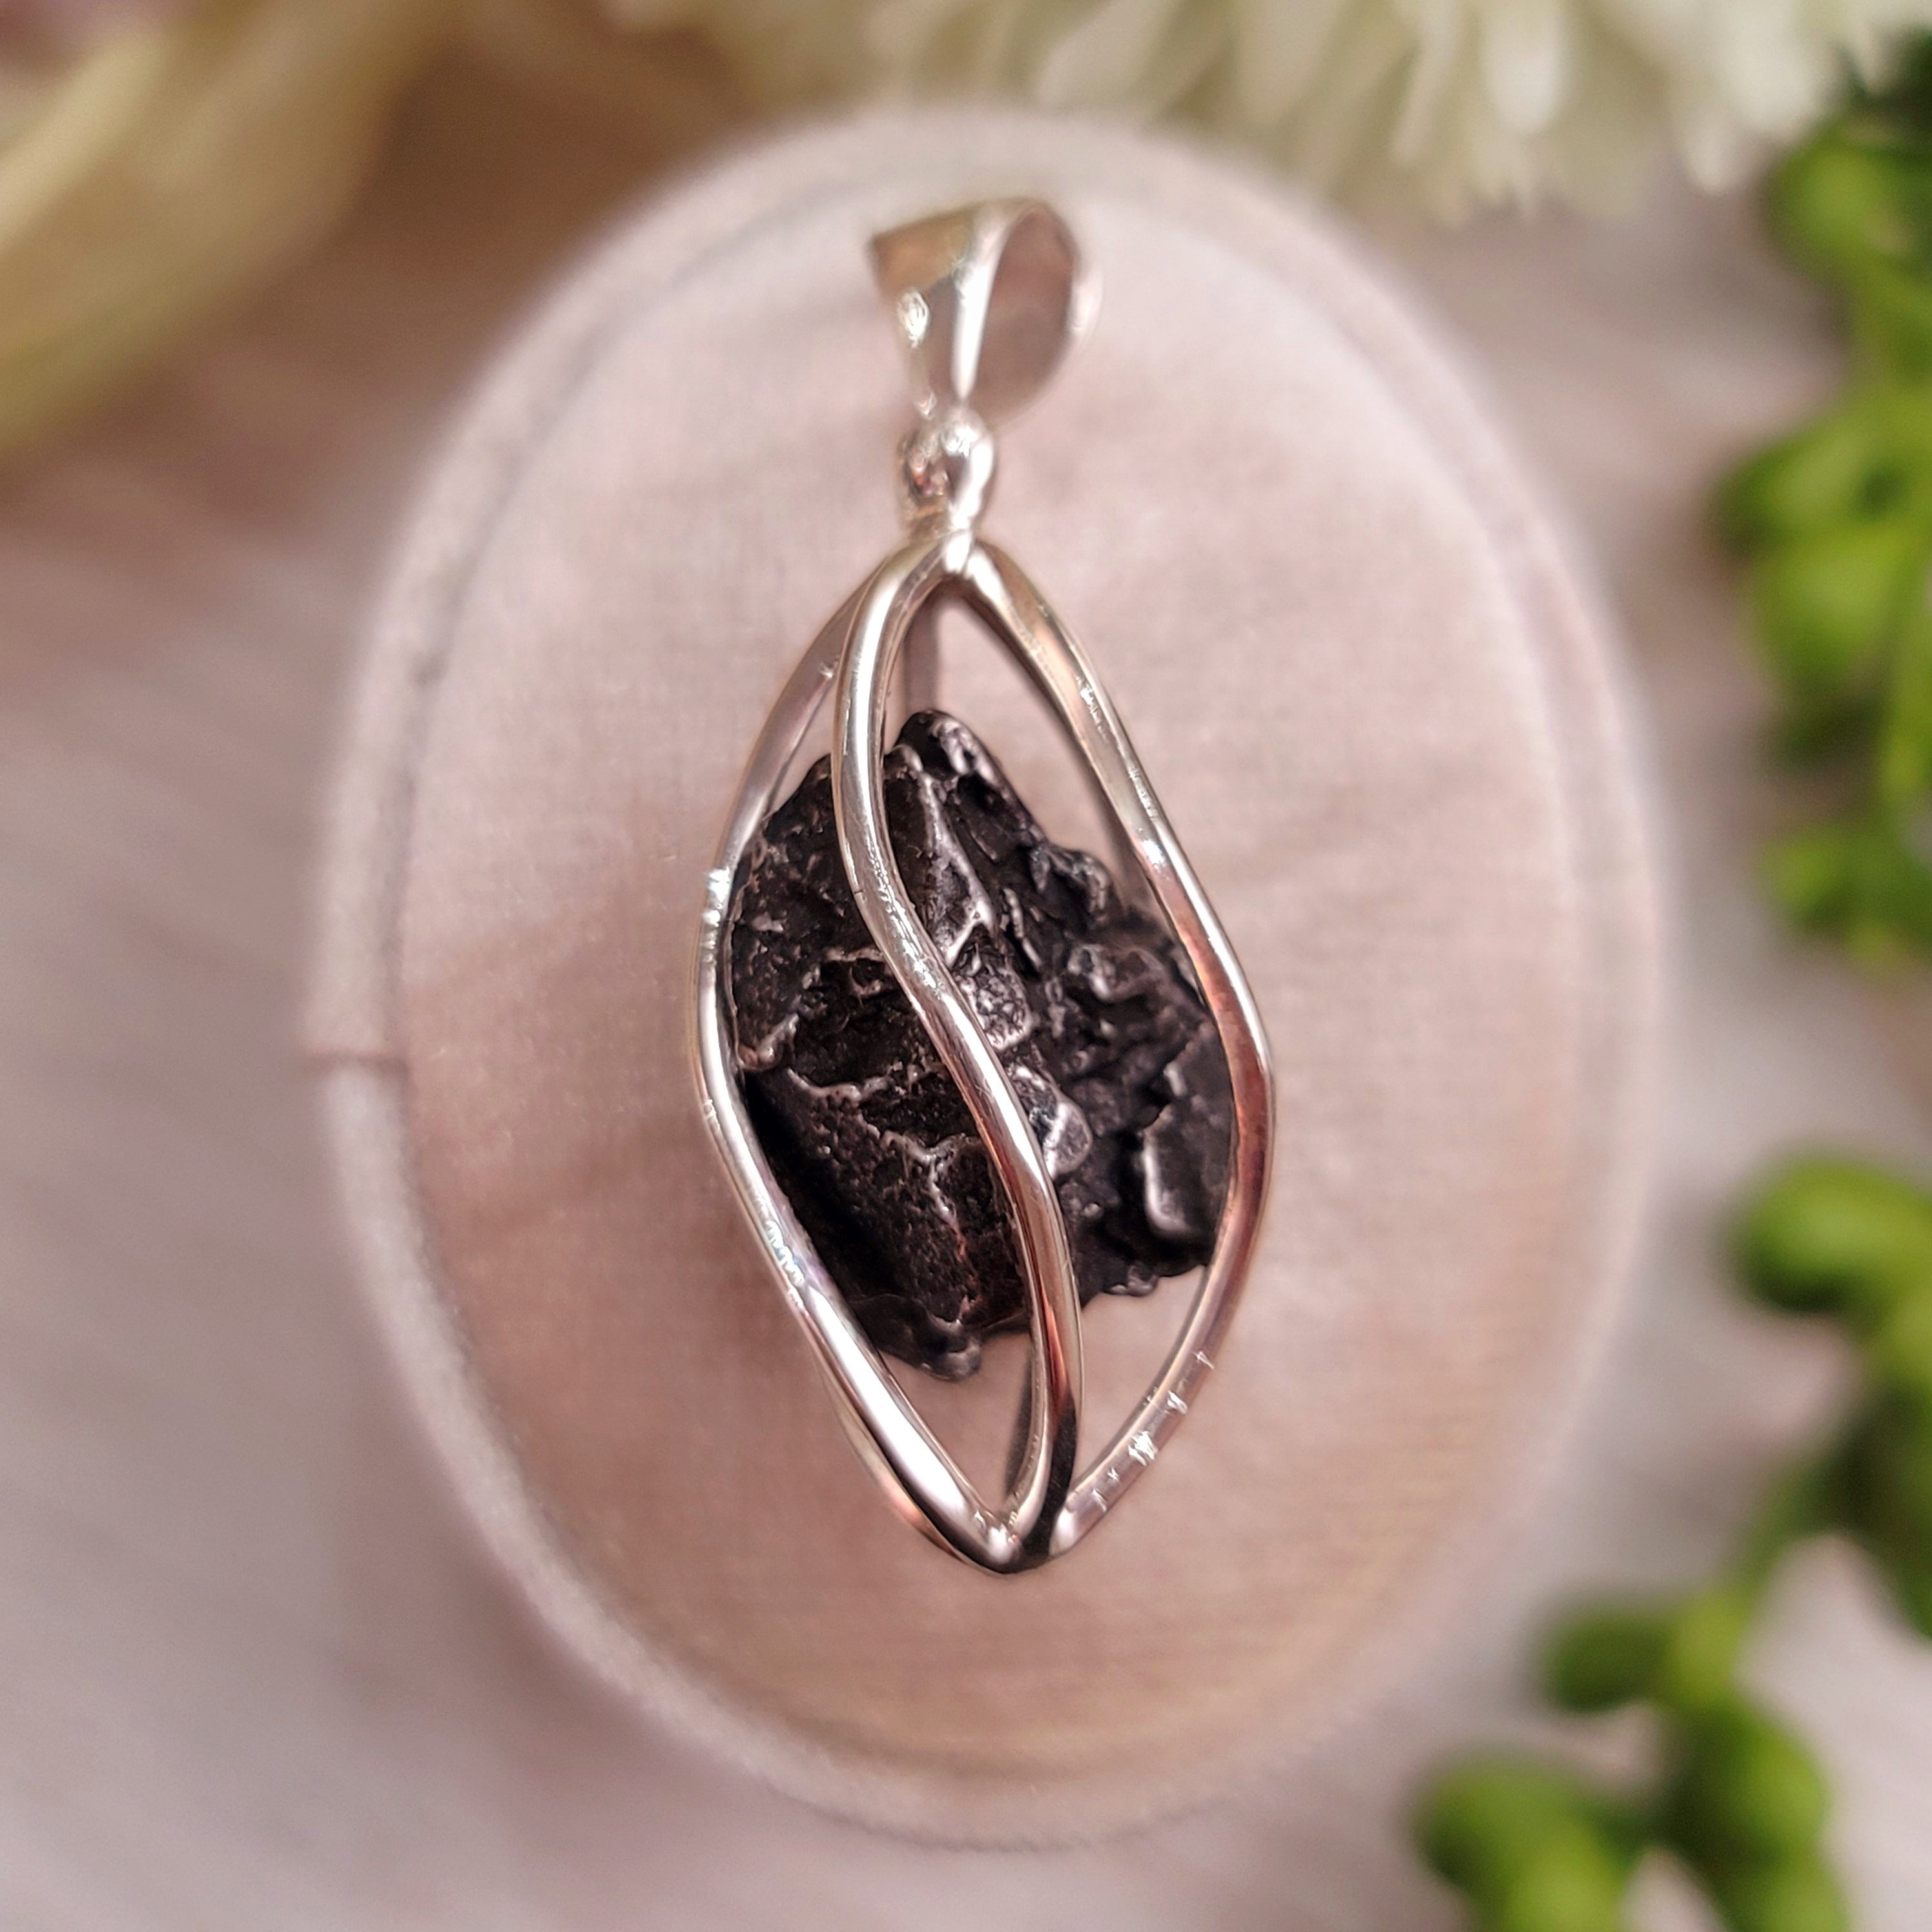 Meteorite Specimen Pendant .925 Silver for Strengthening Solar Energy Within and Positive Life Force Energy.